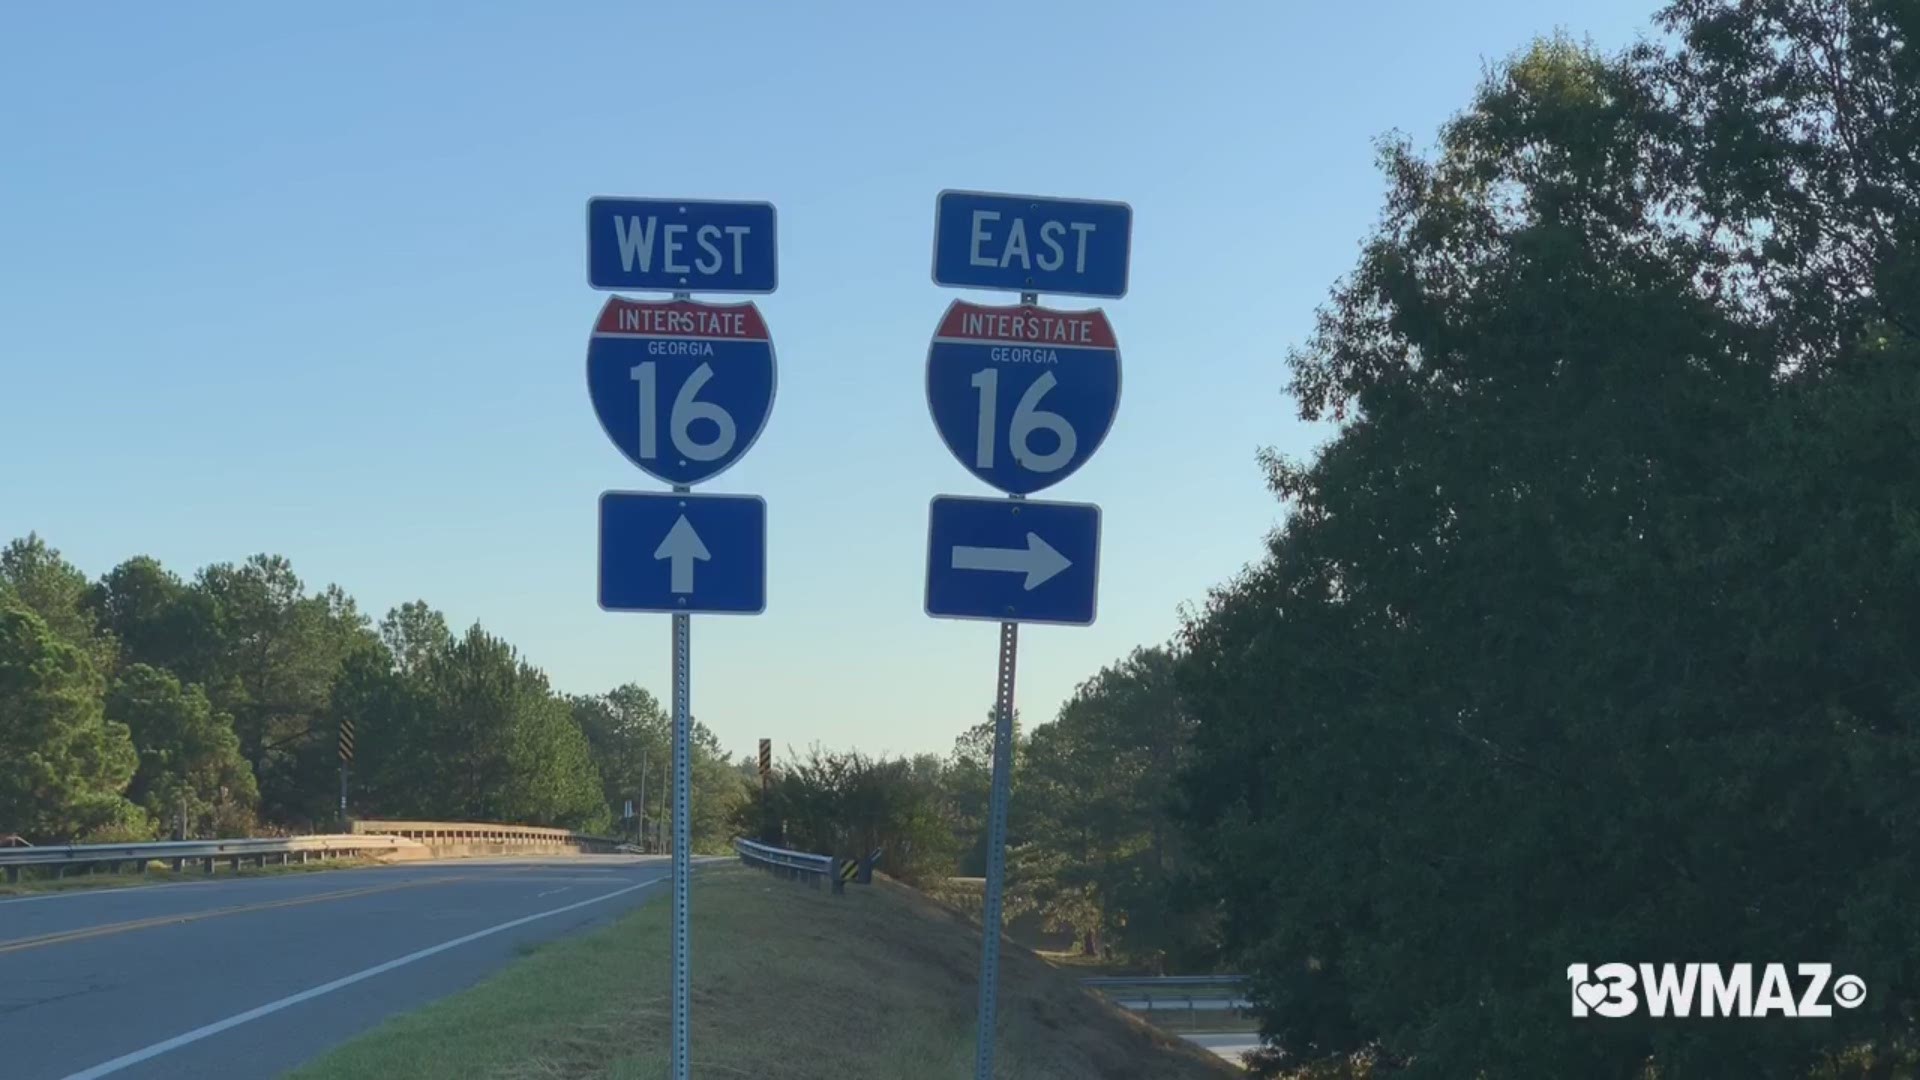 Contraflow has been enacted on I-16 Tuesday morning. Traffic will be flowing west on both lanes.